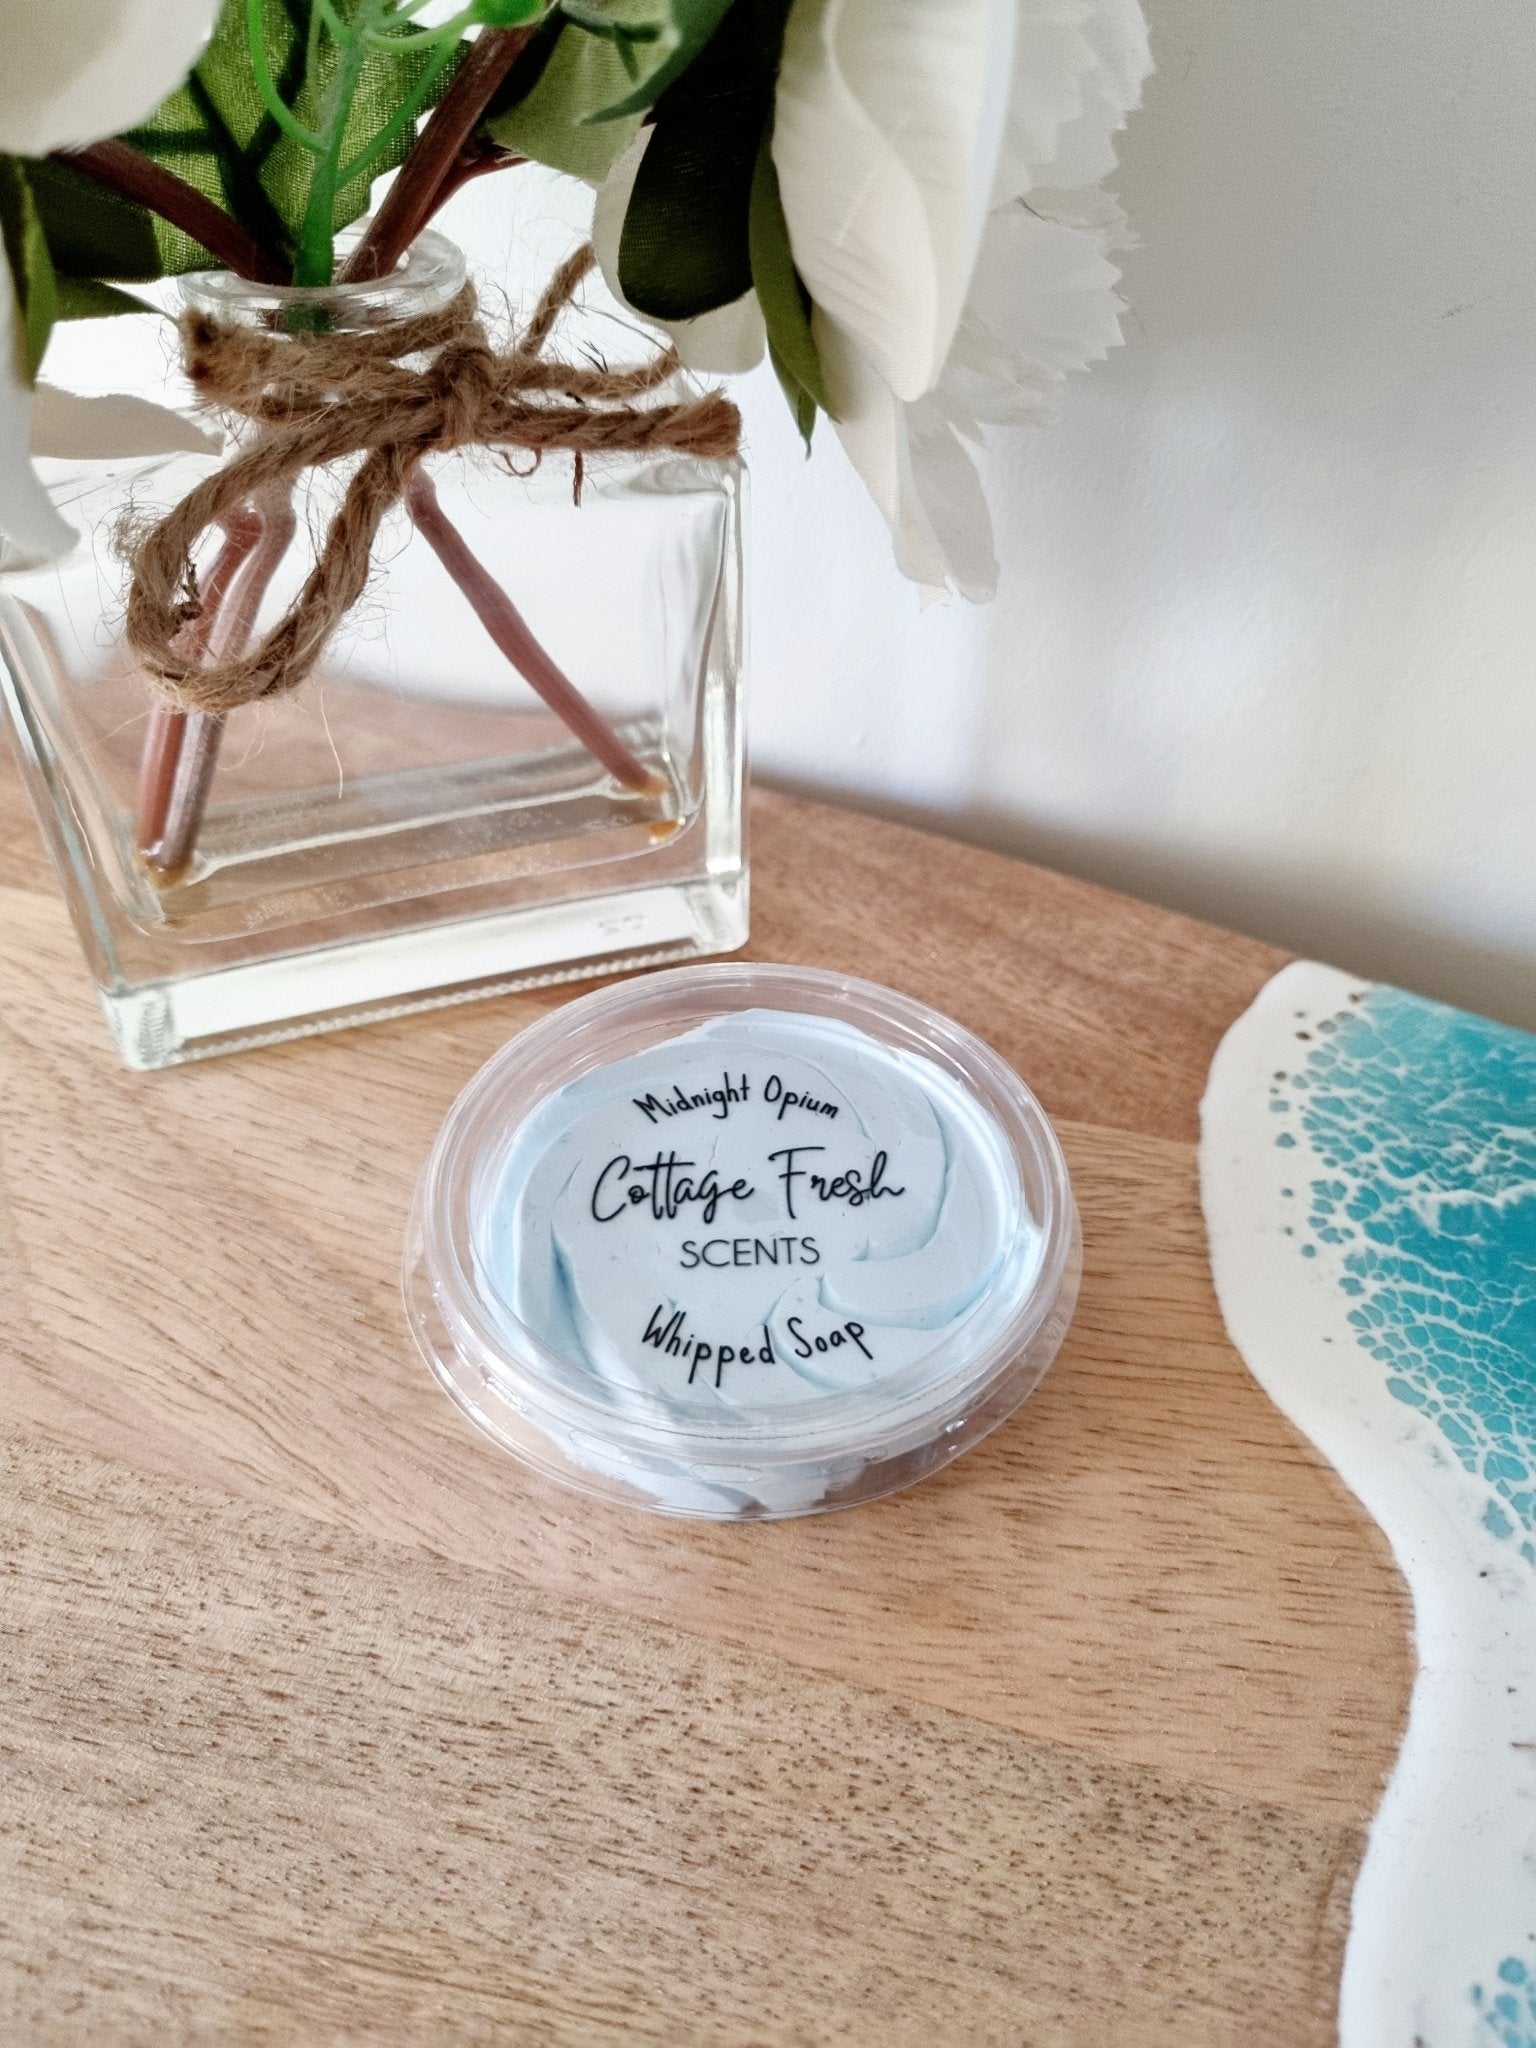 Midnight Opium Whipped Soap - Whipped Soap - Cottage Fresh Scents